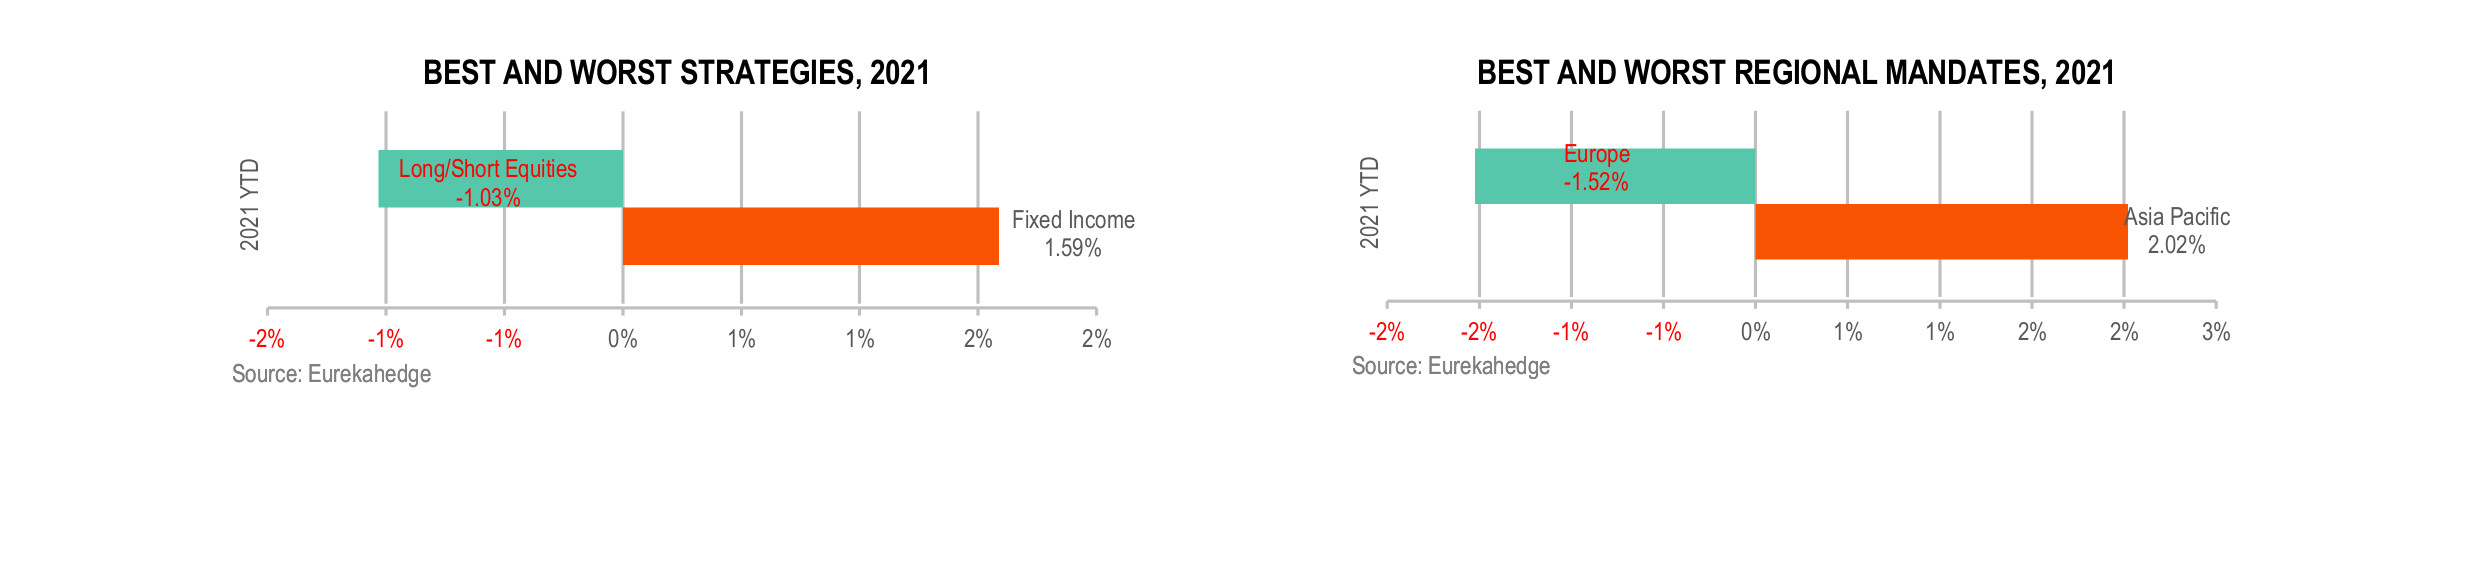 Funds of Hedge Funds Infographic March 2021 - best and worst strategy and regional mandate